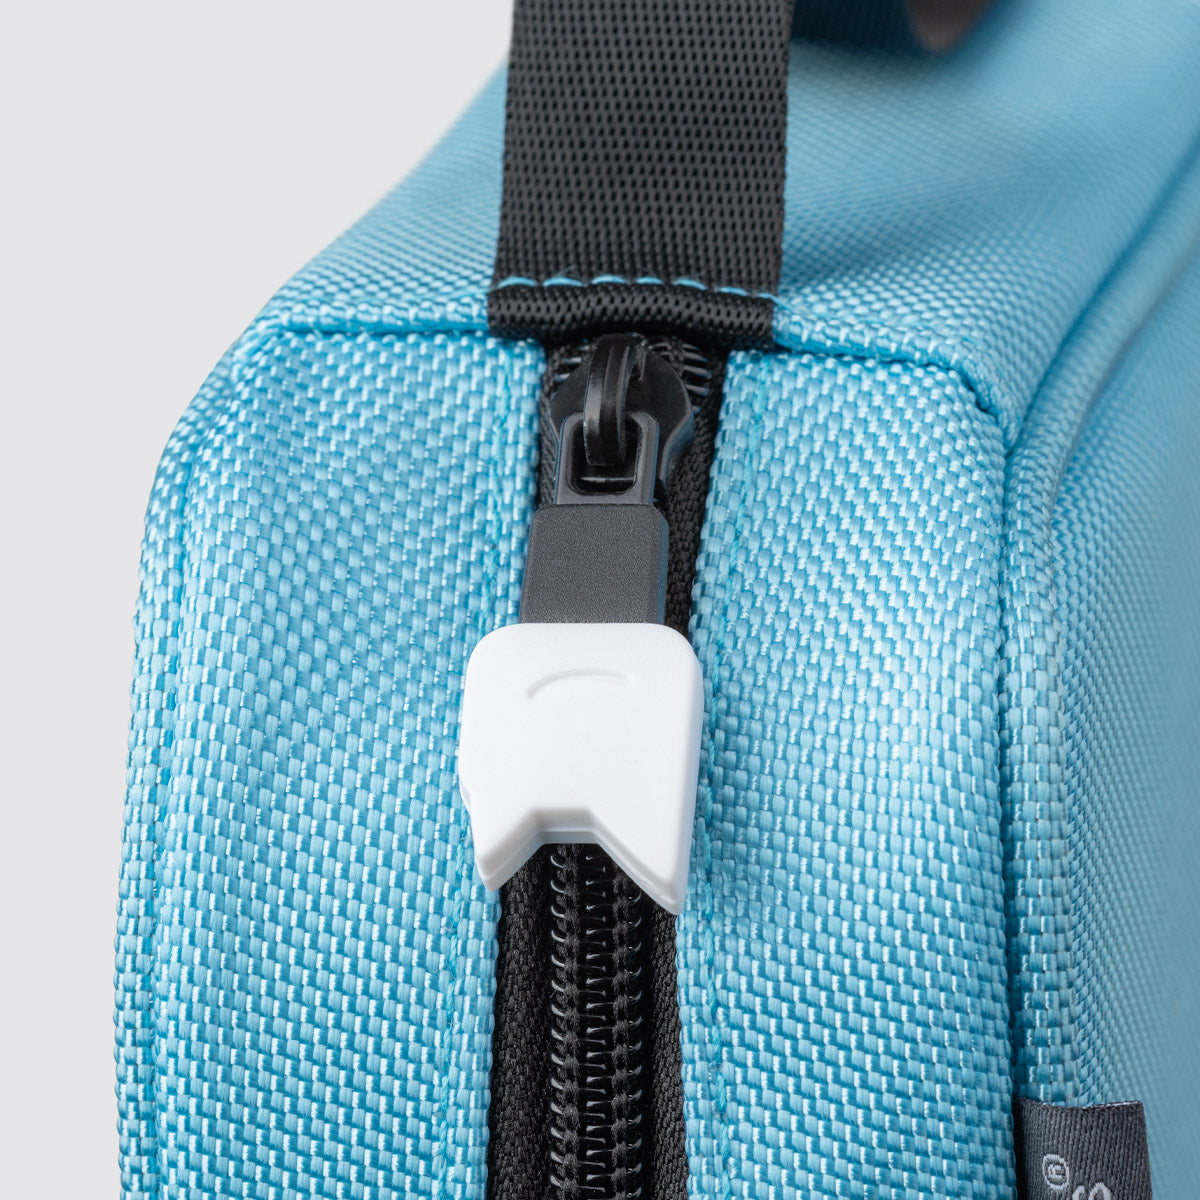 Tonie Carrying Case: Light Blue